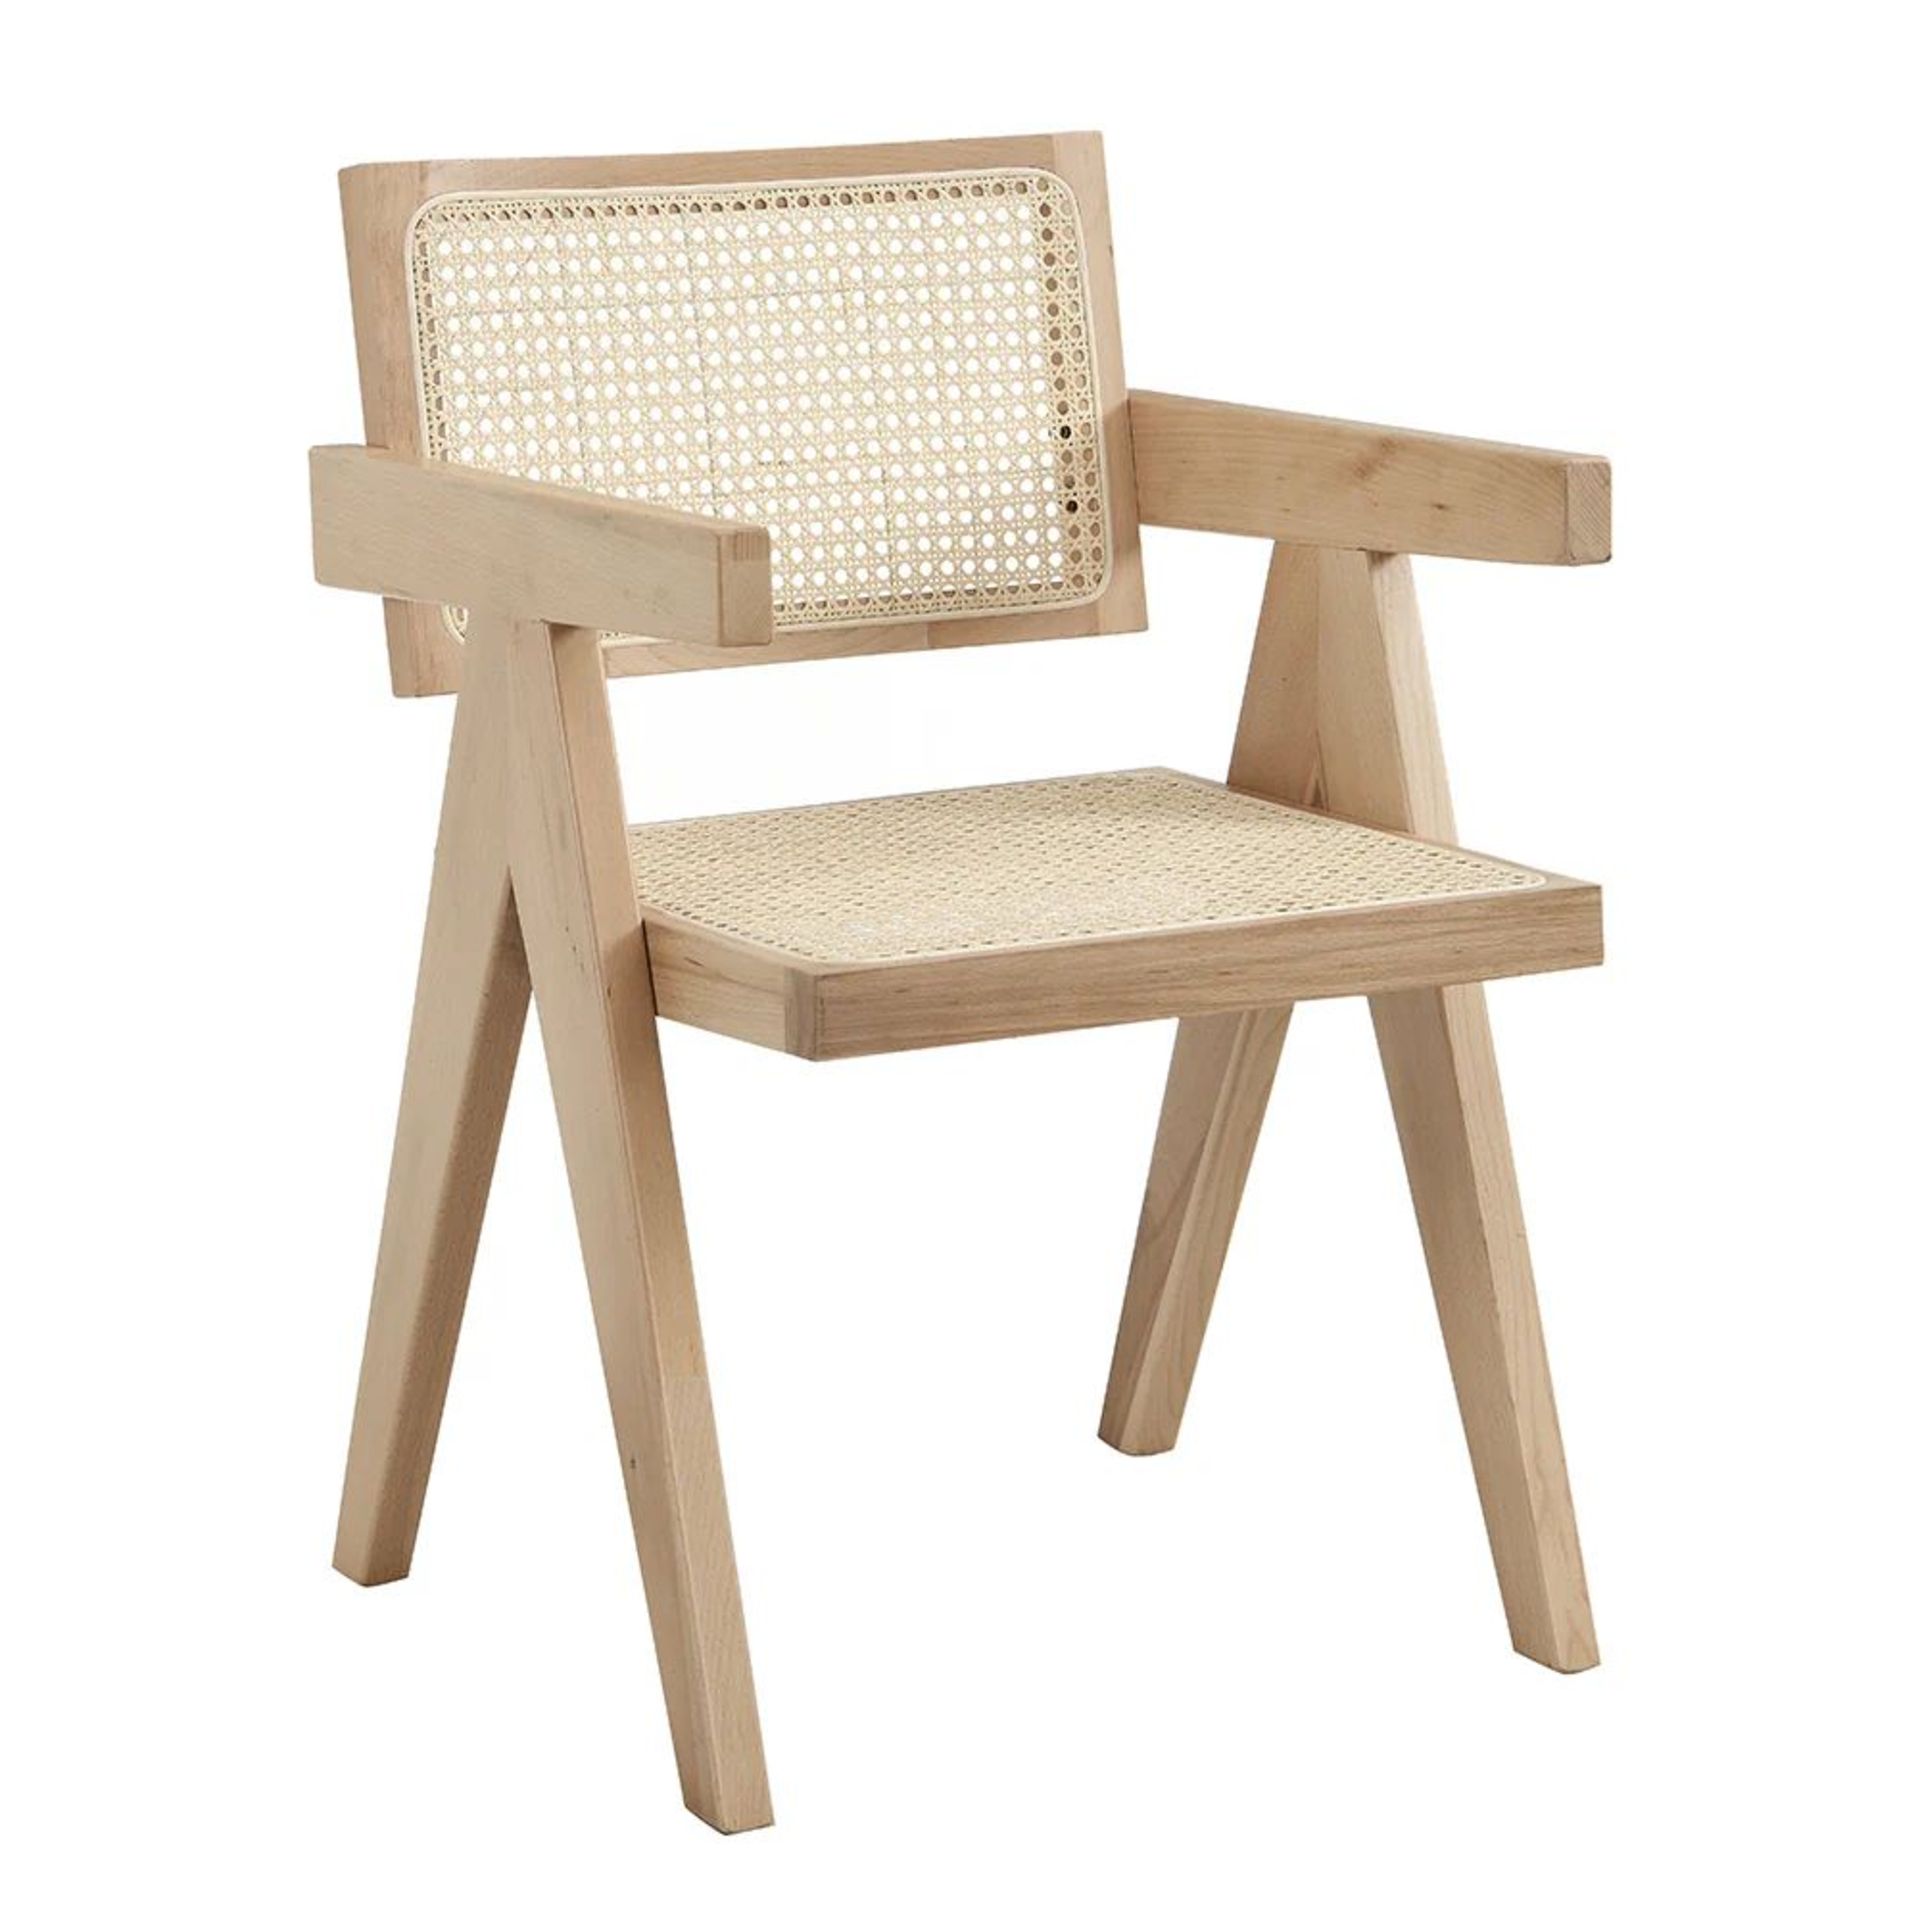 Jeanne Natural Colour Cane Rattan Solid Beech Wood Dining Chair. - R13.11. RRP £239.99. The cane - Image 2 of 4